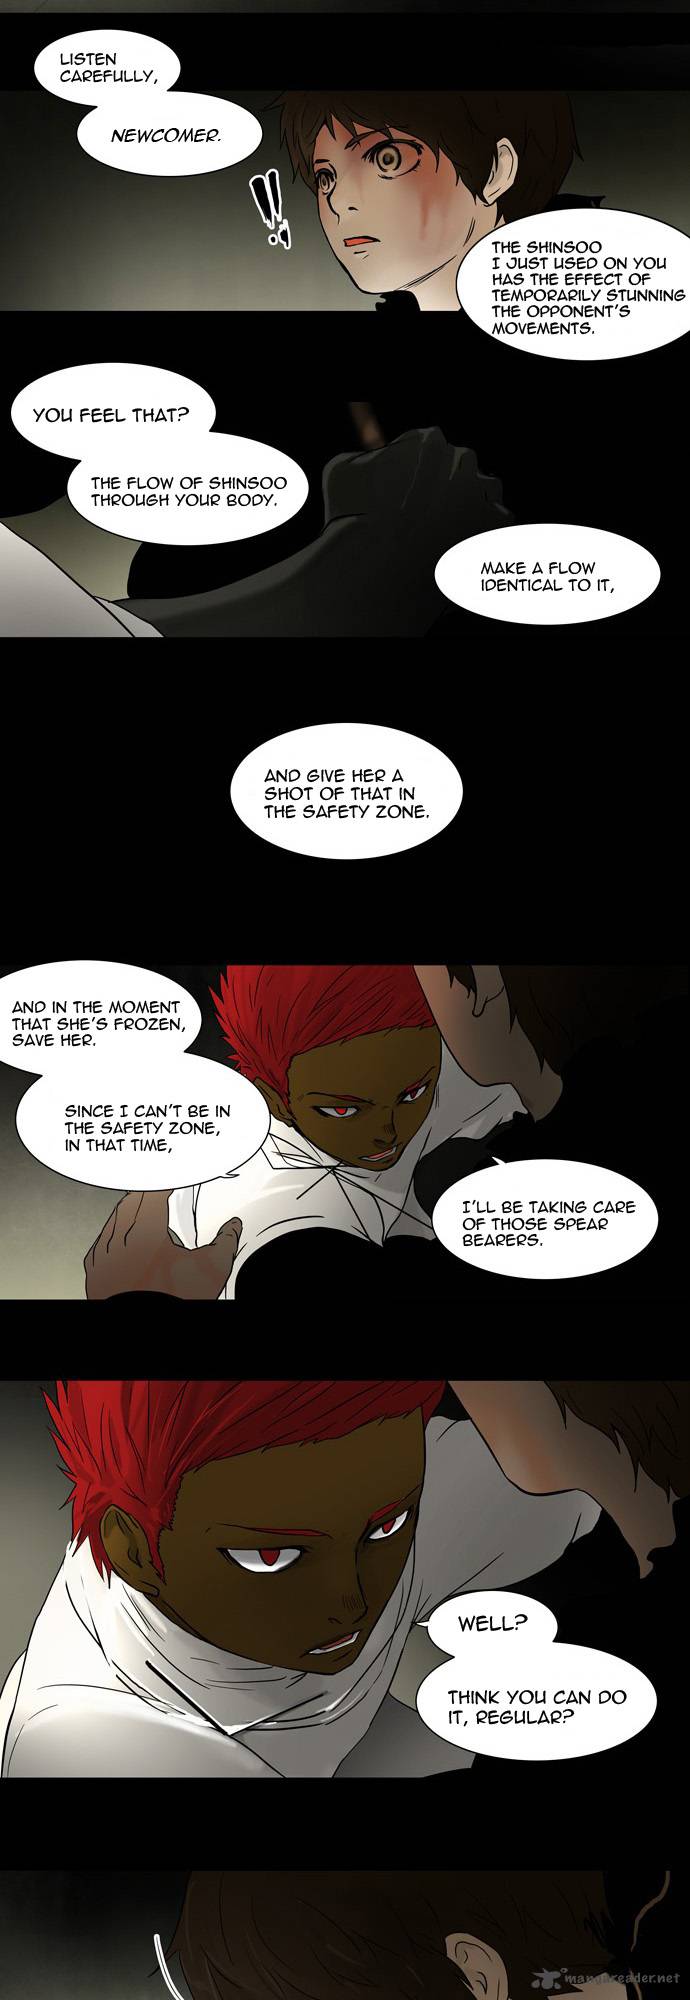 Tower Of God 48 38